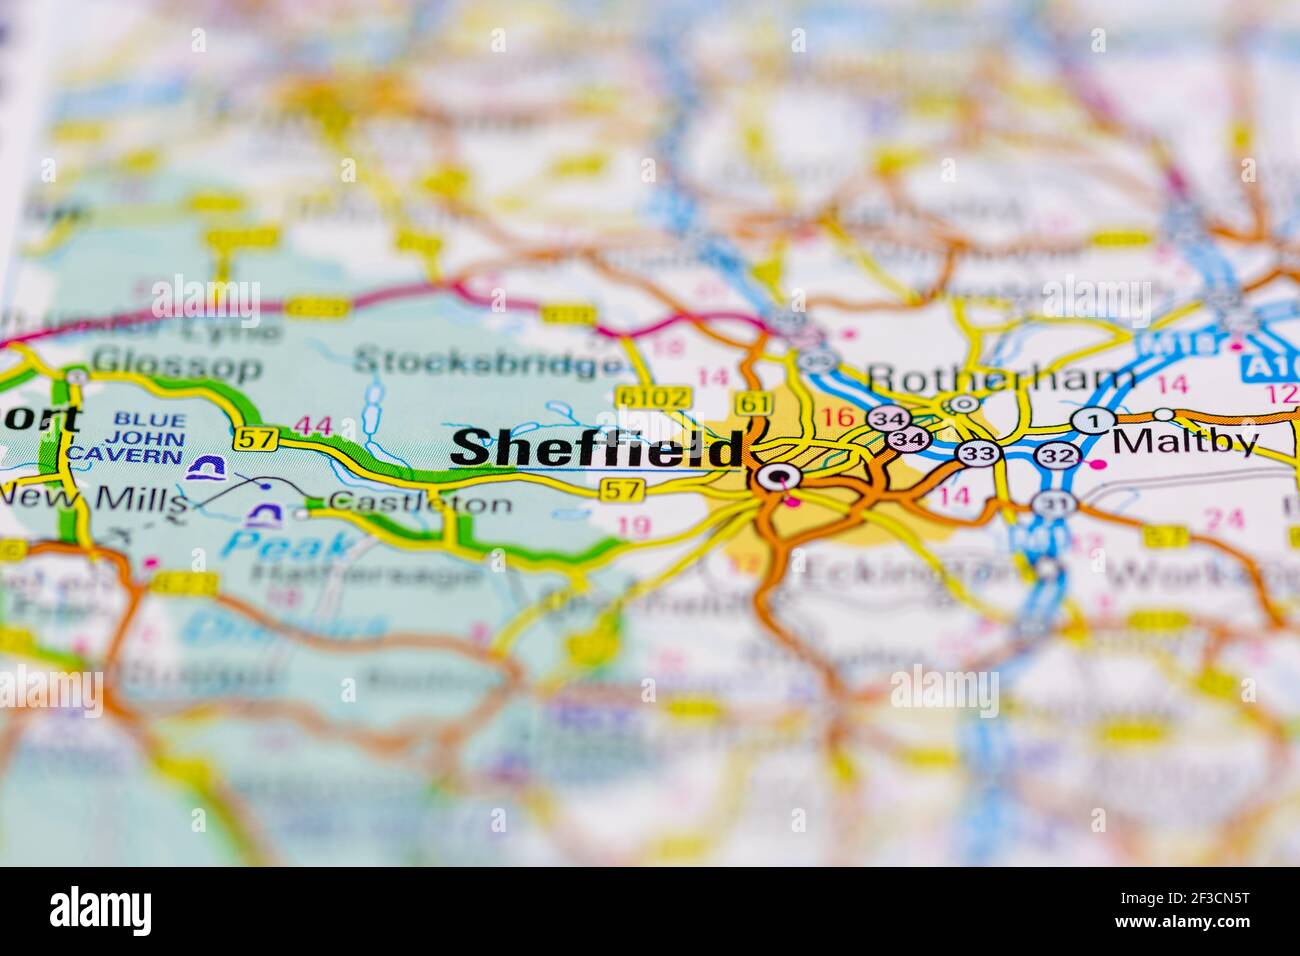 Sheffield Shown on a geography map or road map Stock Photo